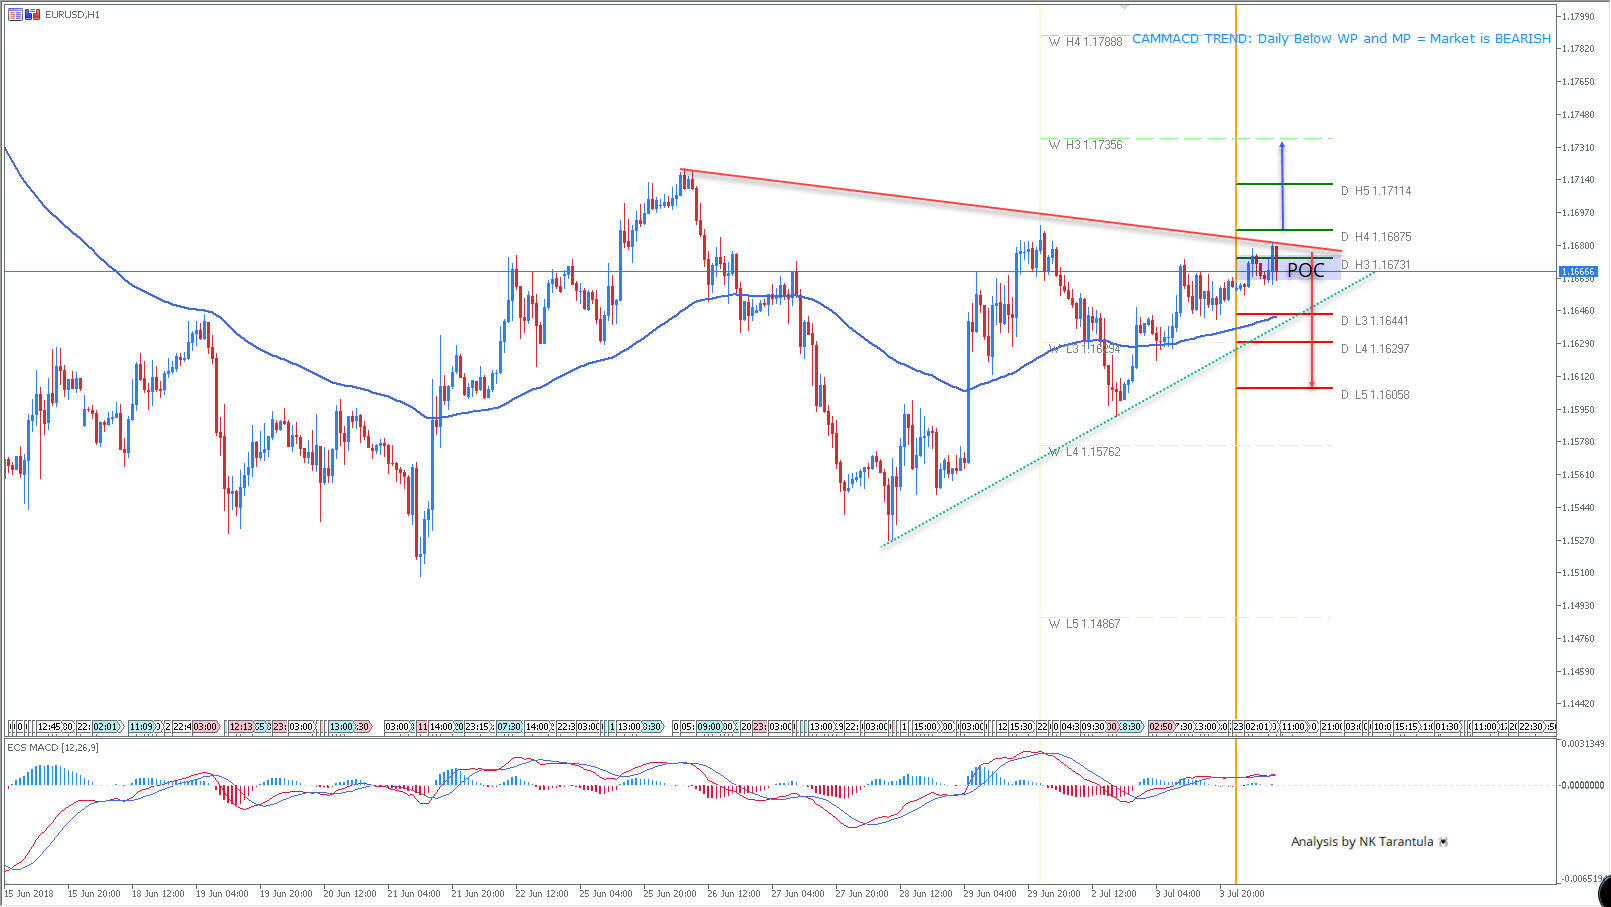 EUR/USD Watch Out for 3 Touch Trend Line Resistance